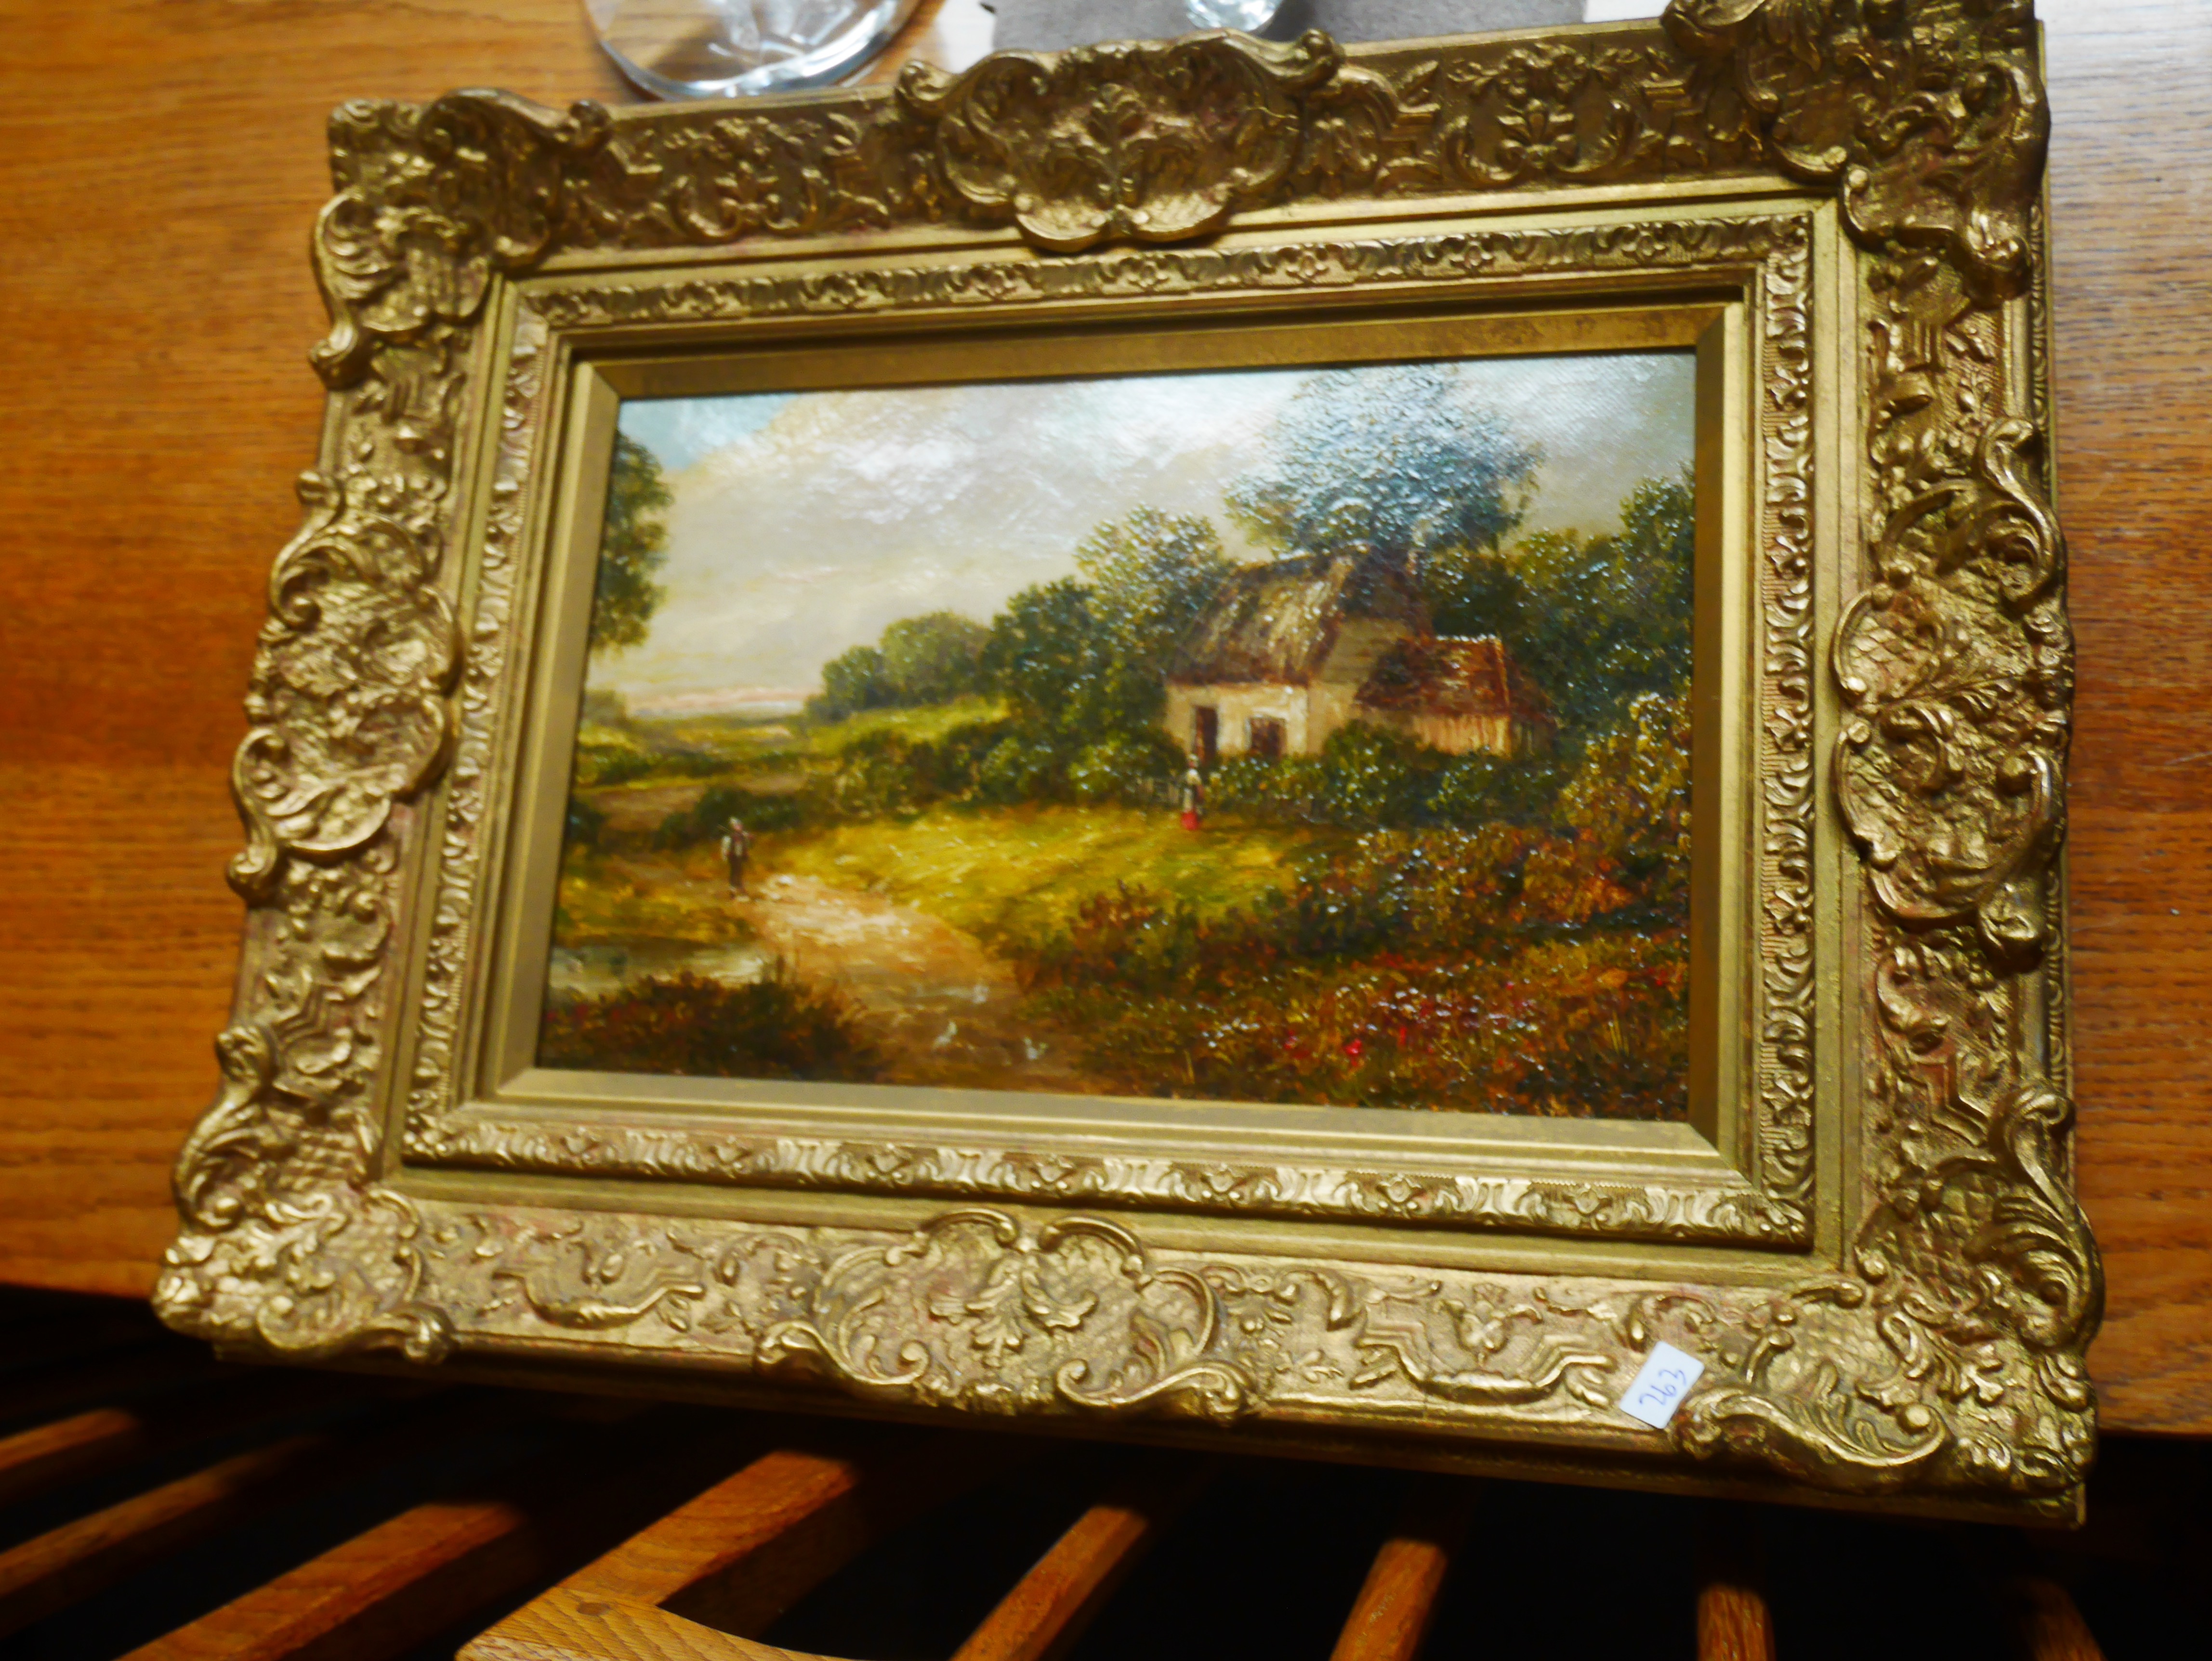 Oil painting of Country scene